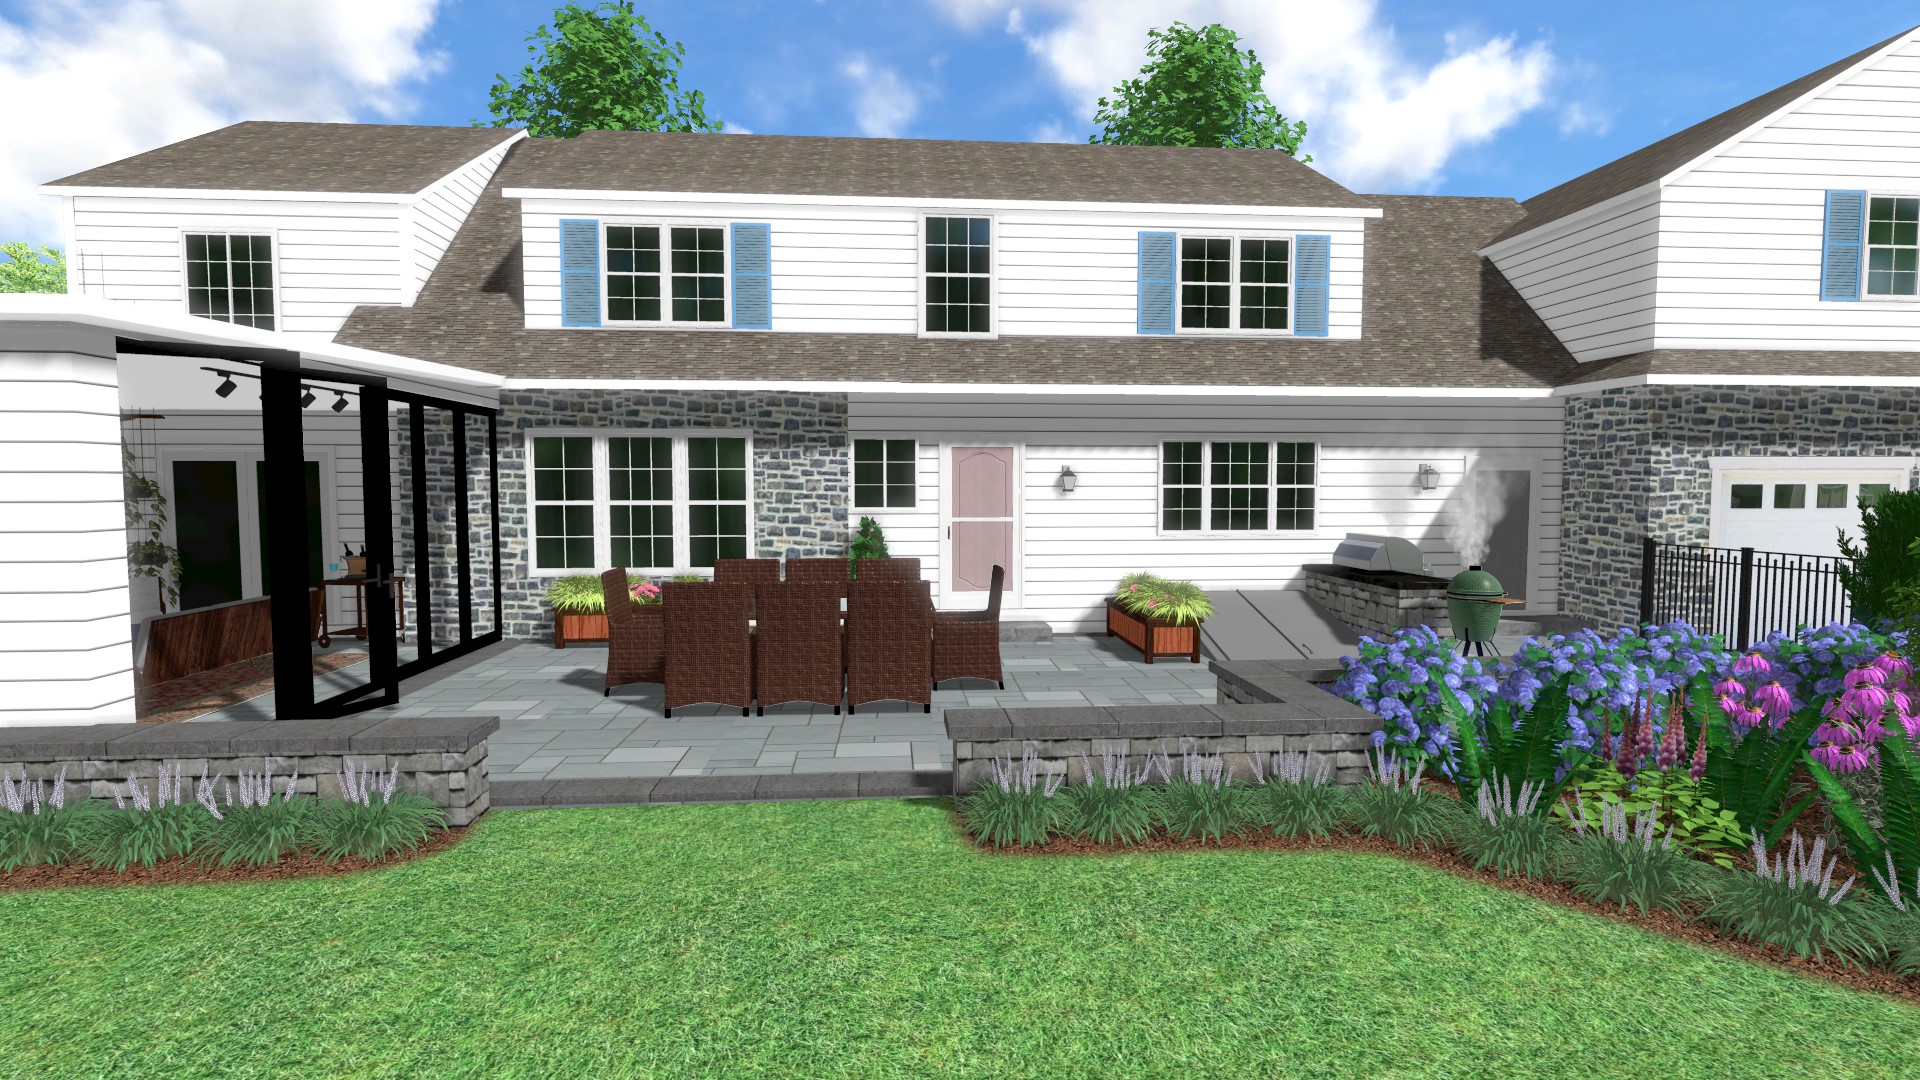 Full Estate Design and Planning in West Chester PA